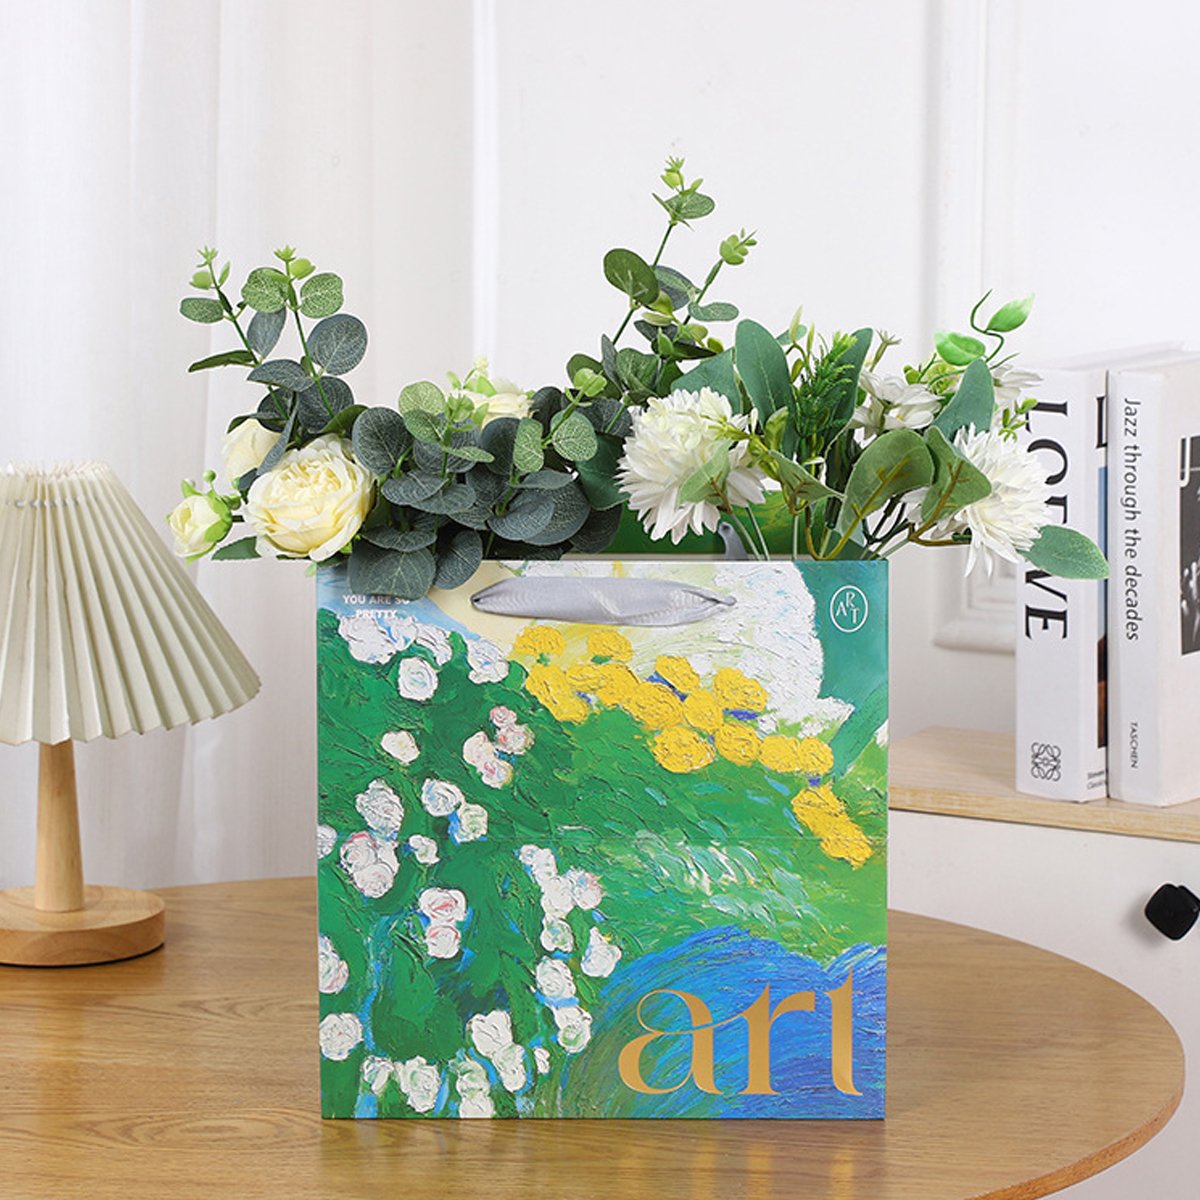 Elevate Your Gifts with Artistic Present Paper Bags